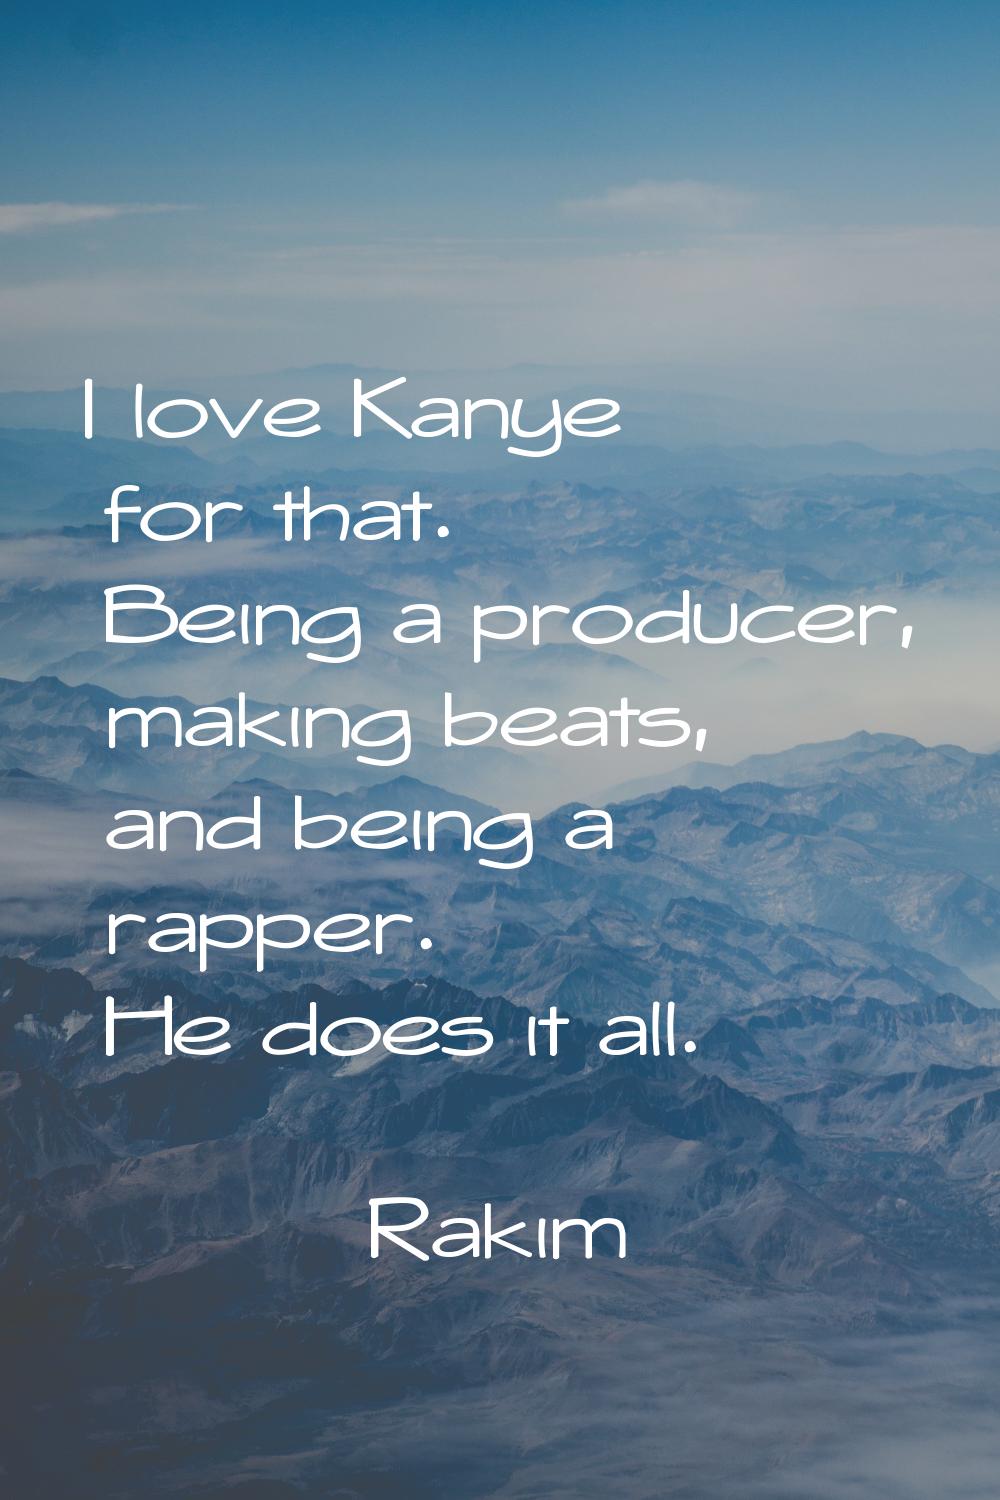 I love Kanye for that. Being a producer, making beats, and being a rapper. He does it all.